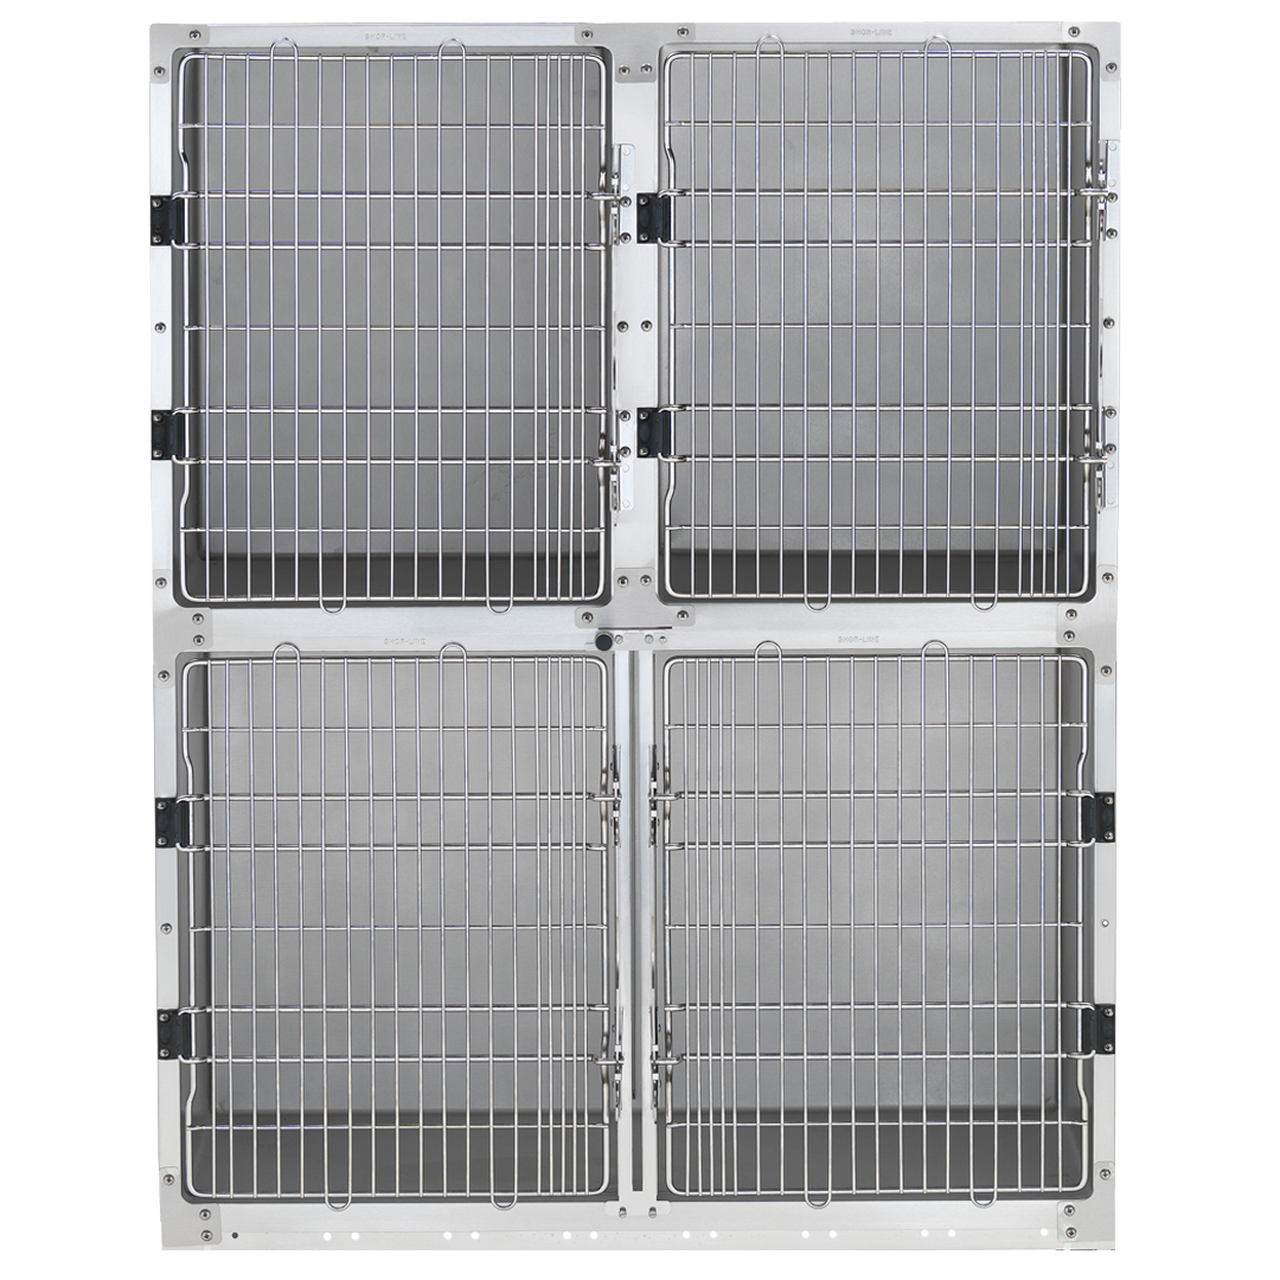 Shor-Line 4' Cage Assembly, Stainless Steel - Option B-Grooming Cage Bank-Pet's Choice Supply